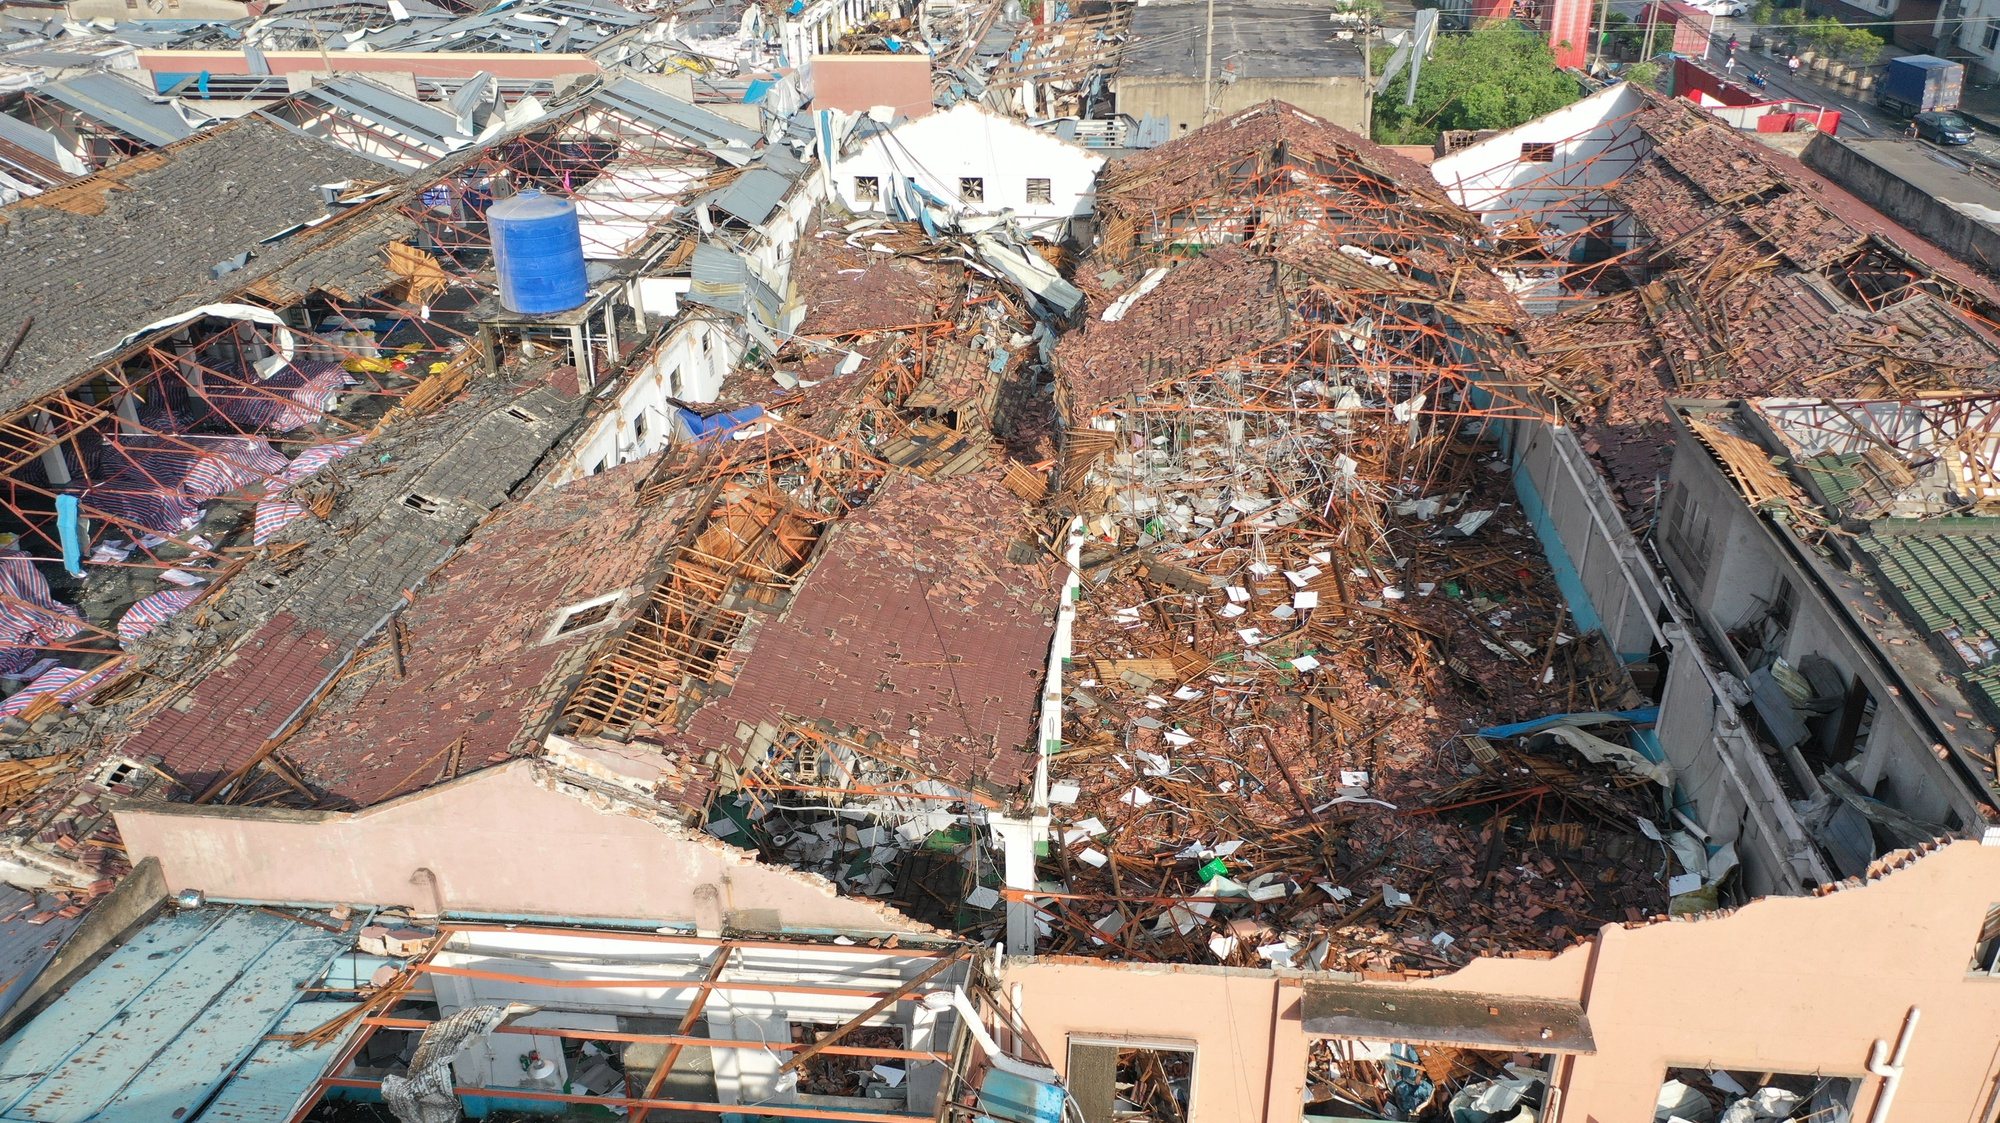 epa09200730 Aerial view of the aftermath of a tornado in Shengze township, Suzhou, Jiangsu province, China, 15 May 2021. At least one person was killed and over 20 were injured. Another tornado hit in Wuhan, killing six people and injuring over 200.  EPA/FANG DONGXU